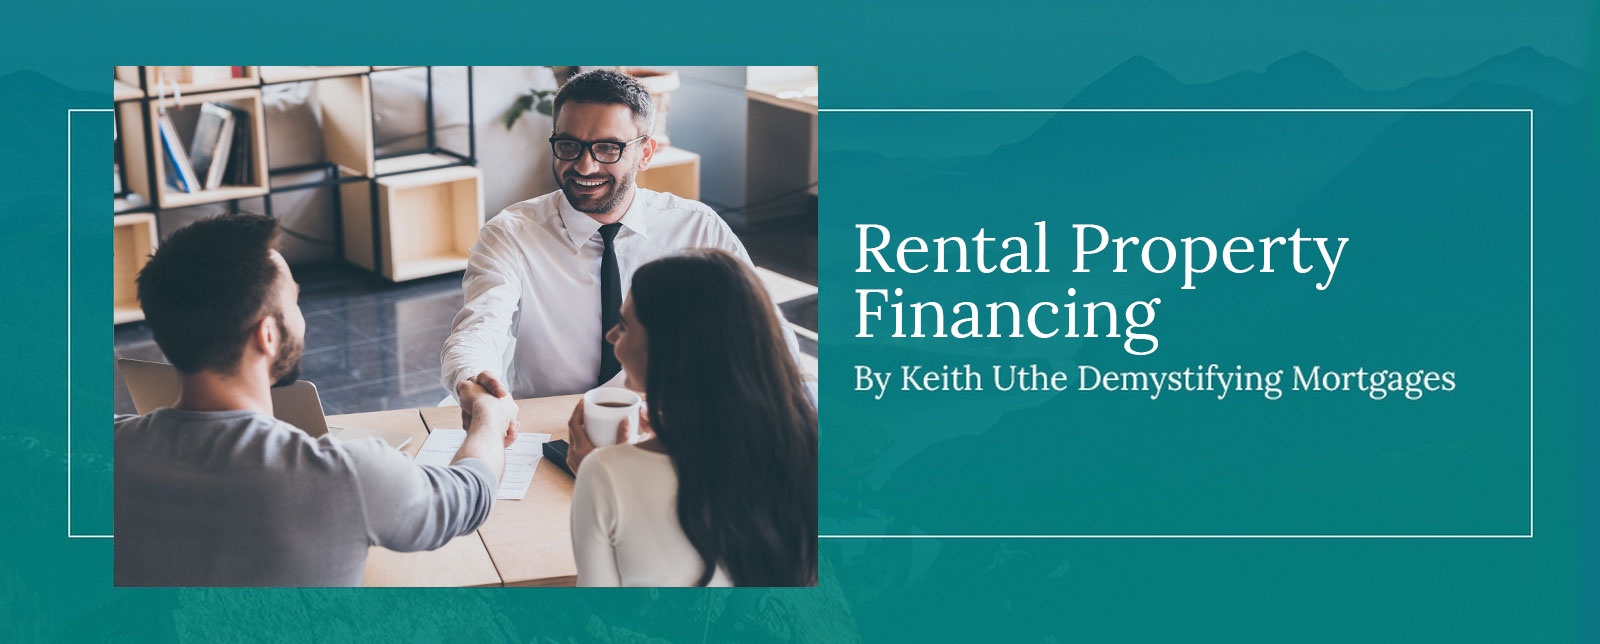 Keith Uthe Demystifying Mortgages - Rental Property Financing in Lethbridge, Calgary, AB